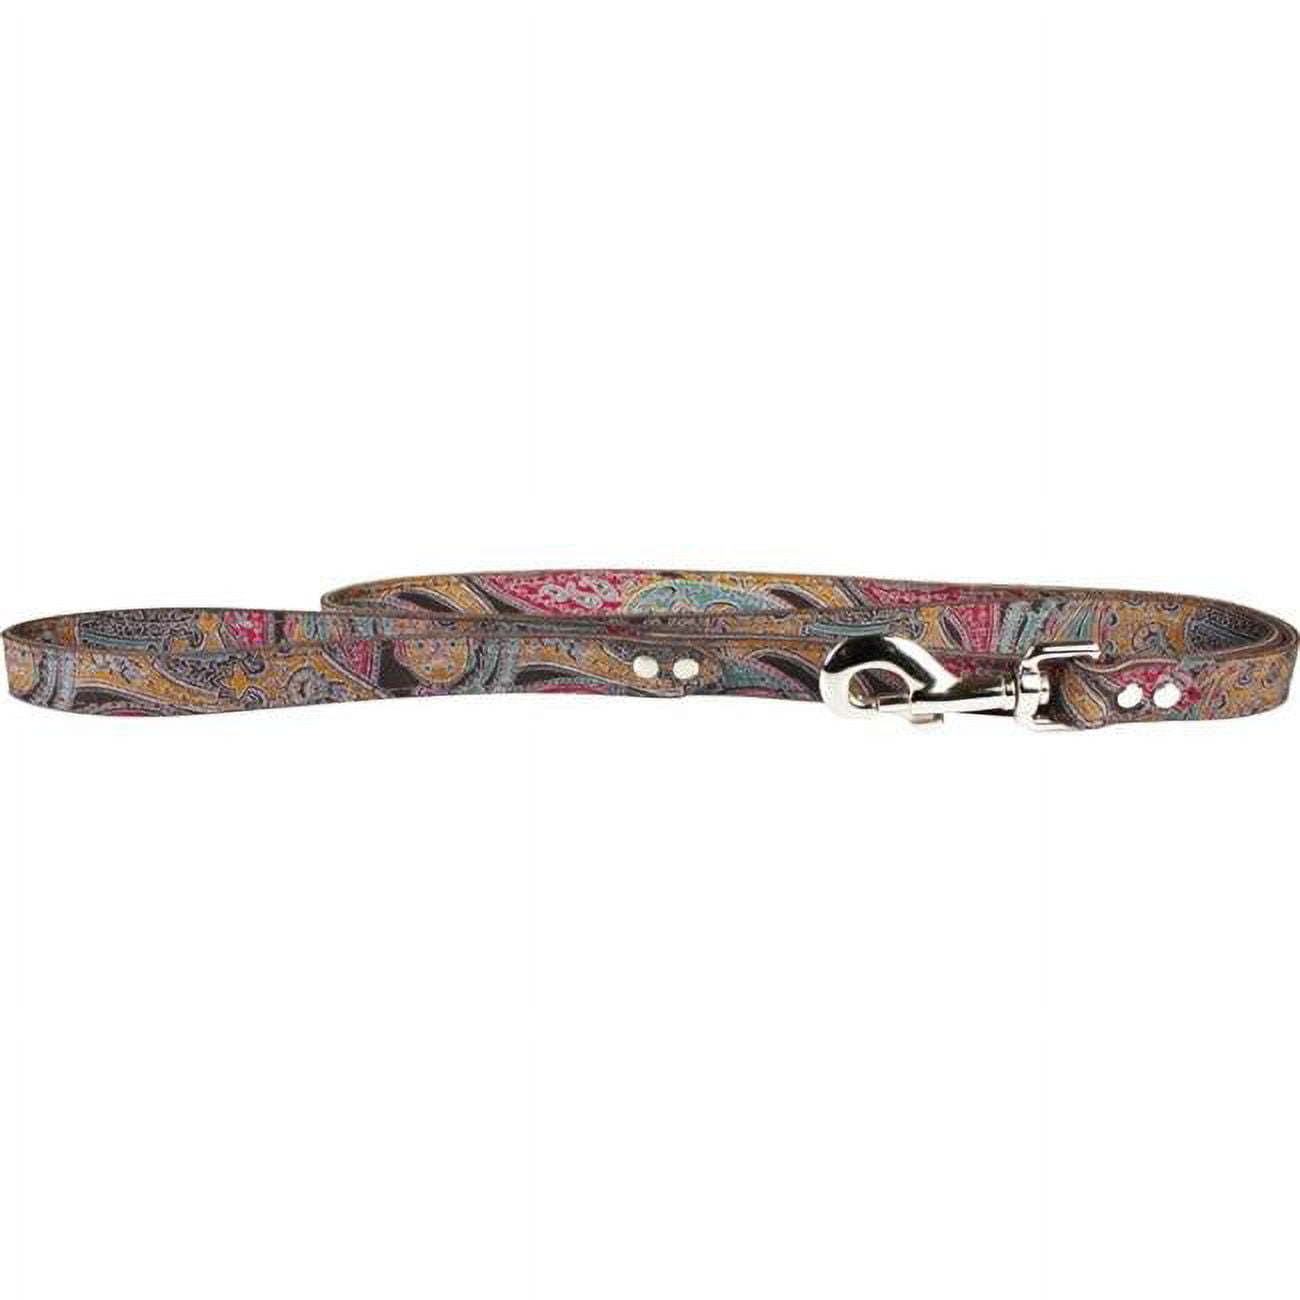 Picture of Leather Brothers 6254-CH 0.5 x 4 ft. Paisley Dog Leash, Chocolate